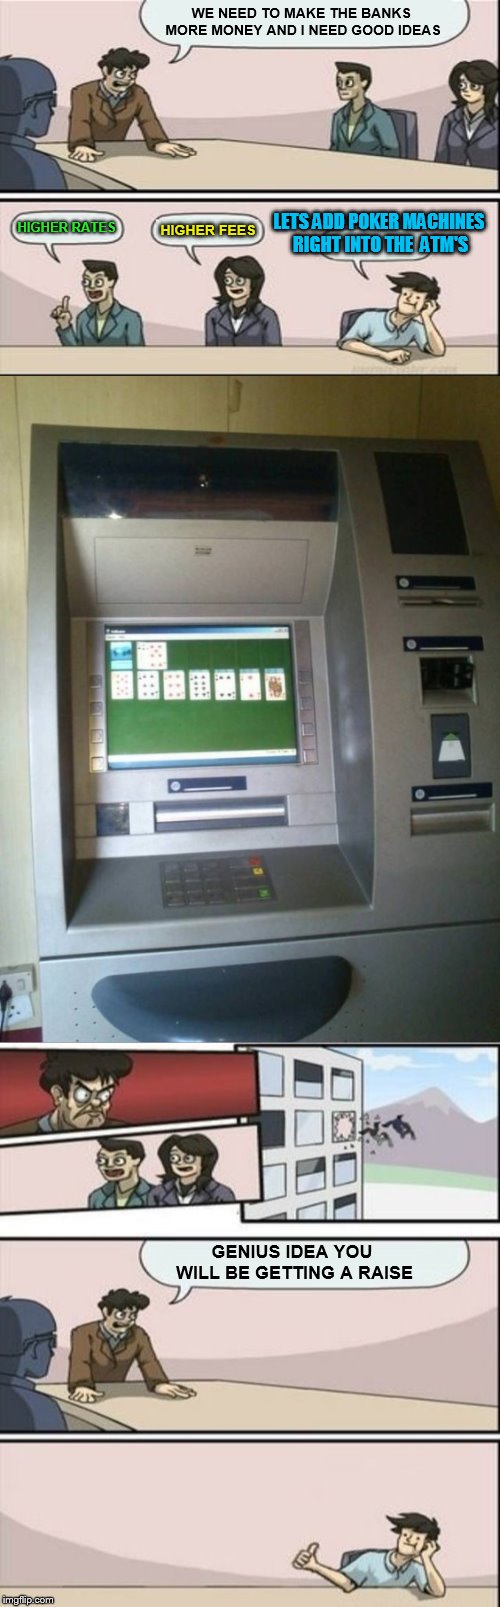 Can you imagine the money the banks would rake in! |  WE NEED TO MAKE THE BANKS MORE MONEY AND I NEED GOOD IDEAS; LETS ADD POKER MACHINES RIGHT INTO THE  ATM'S; HIGHER FEES; HIGHER RATES; GENIUS IDEA YOU WILL BE GETTING A RAISE | image tagged in memes,boardroom meeting suggestion,banks,atm,poker,slot machines | made w/ Imgflip meme maker